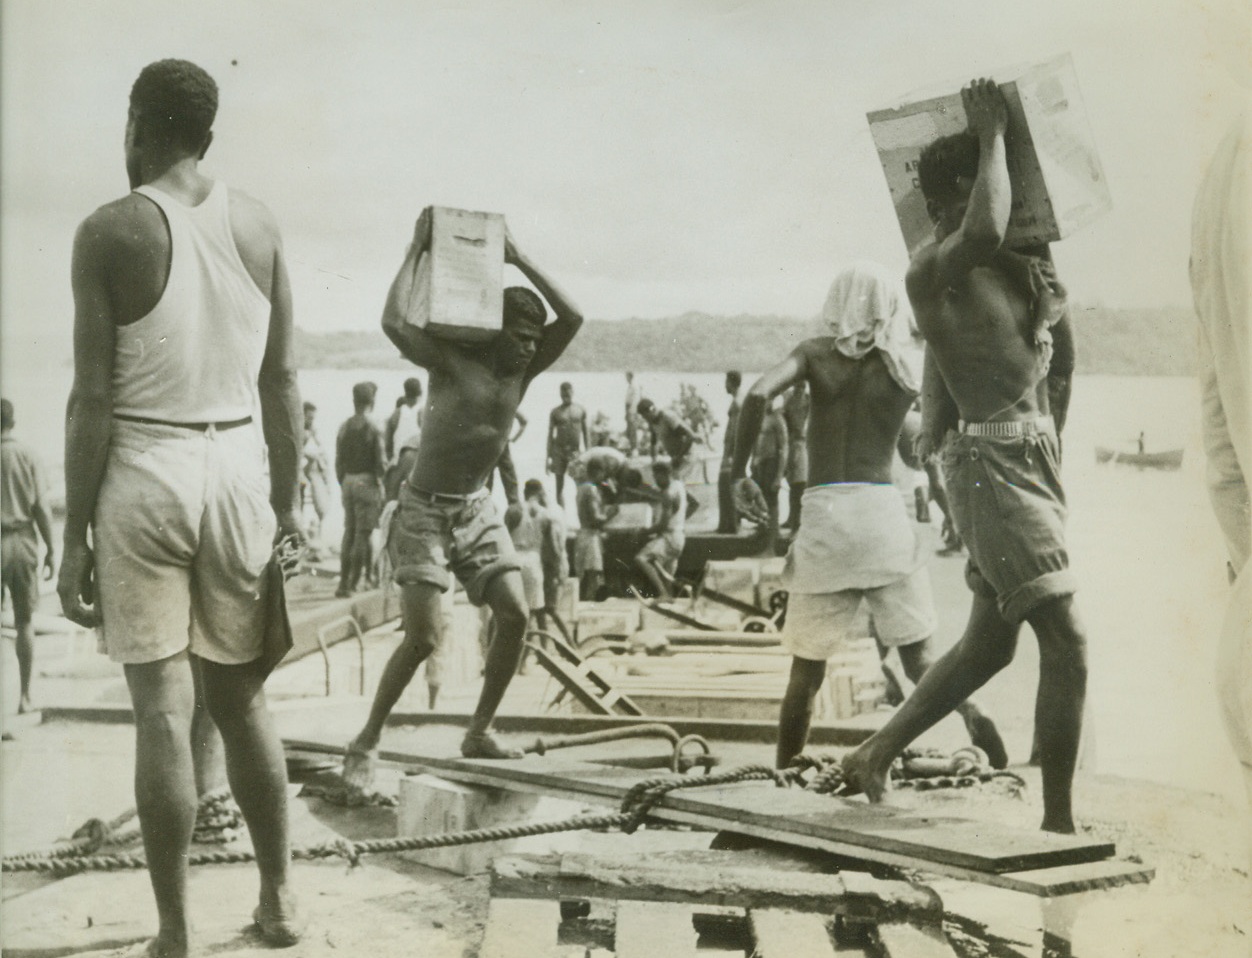 Natives Unload Supplies for Pacific Base, 8/13/1942. Natives of an island in the Southwest Pacific unload supplies brought ashore by a lighter for a U.S. operations base which will be used to prevent further Japanese conquests in the area.  Credit line (ACME);